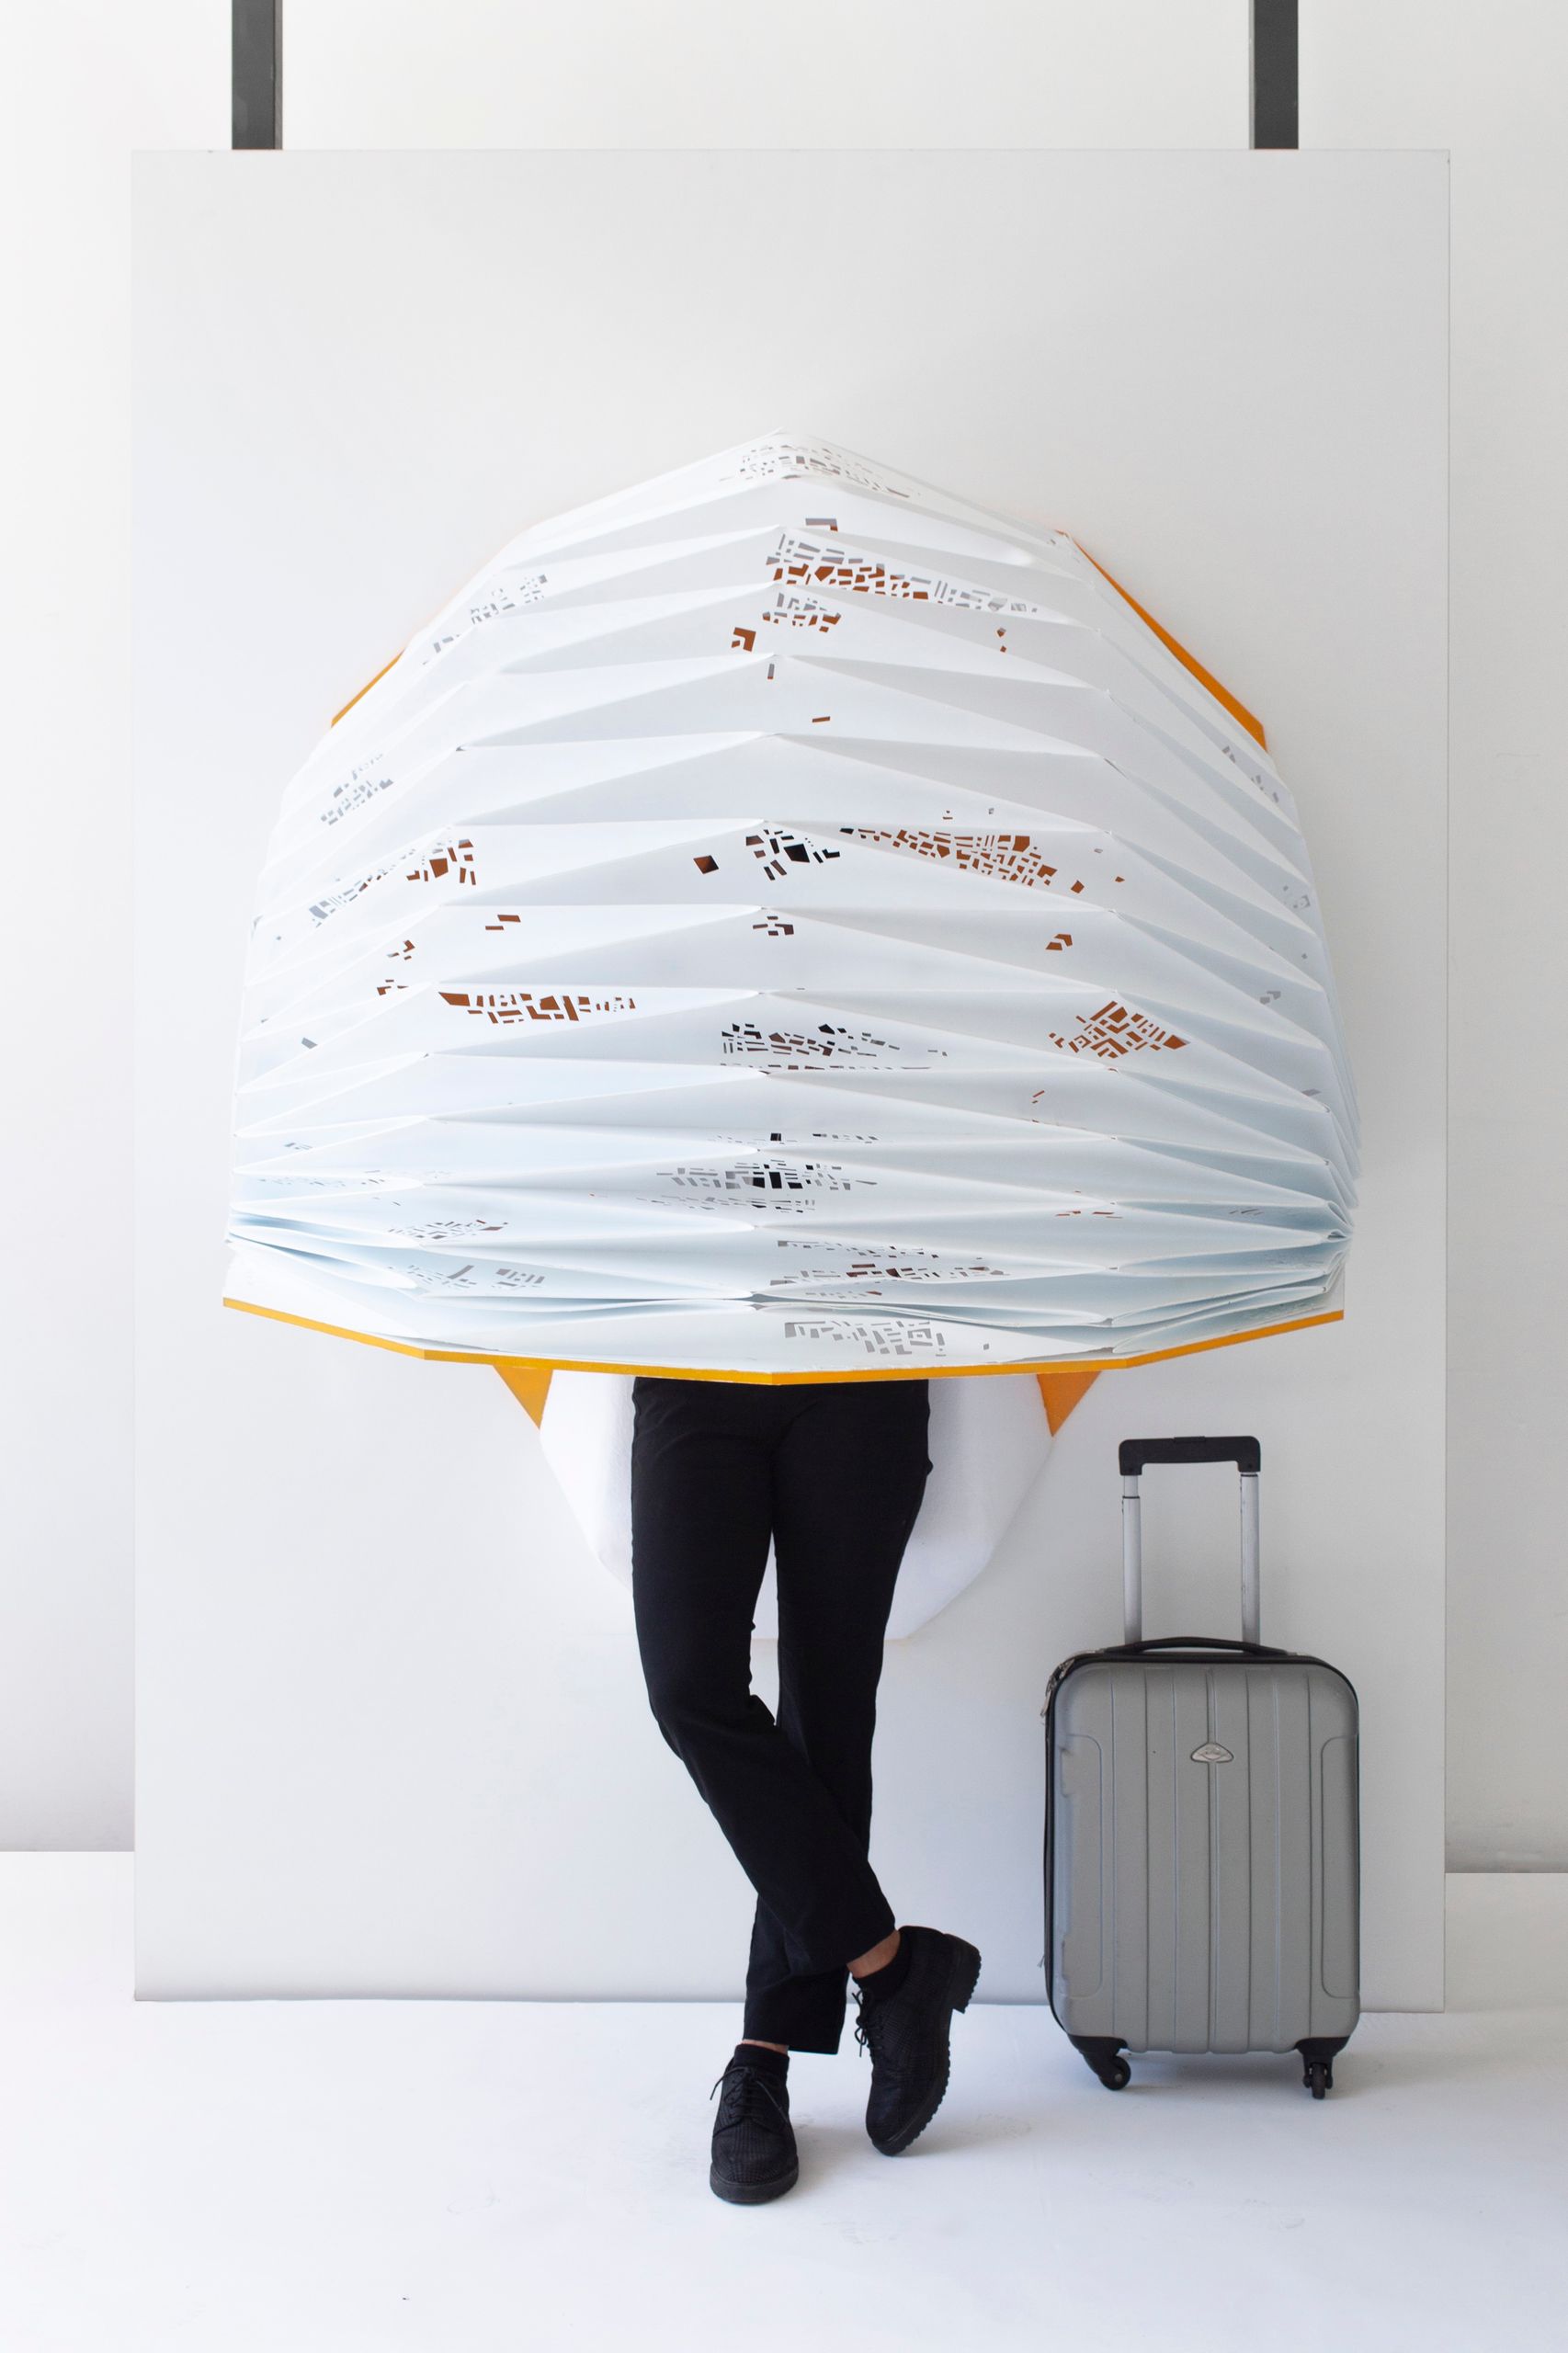 Diploma project bachelor design option interior architecture Schwerdtel Sonia, The object in question aims to cover the view of any distraction thanks to the covering origami, in plastic. It allows passengers to rest against the wall back, pull the table down and work on it.